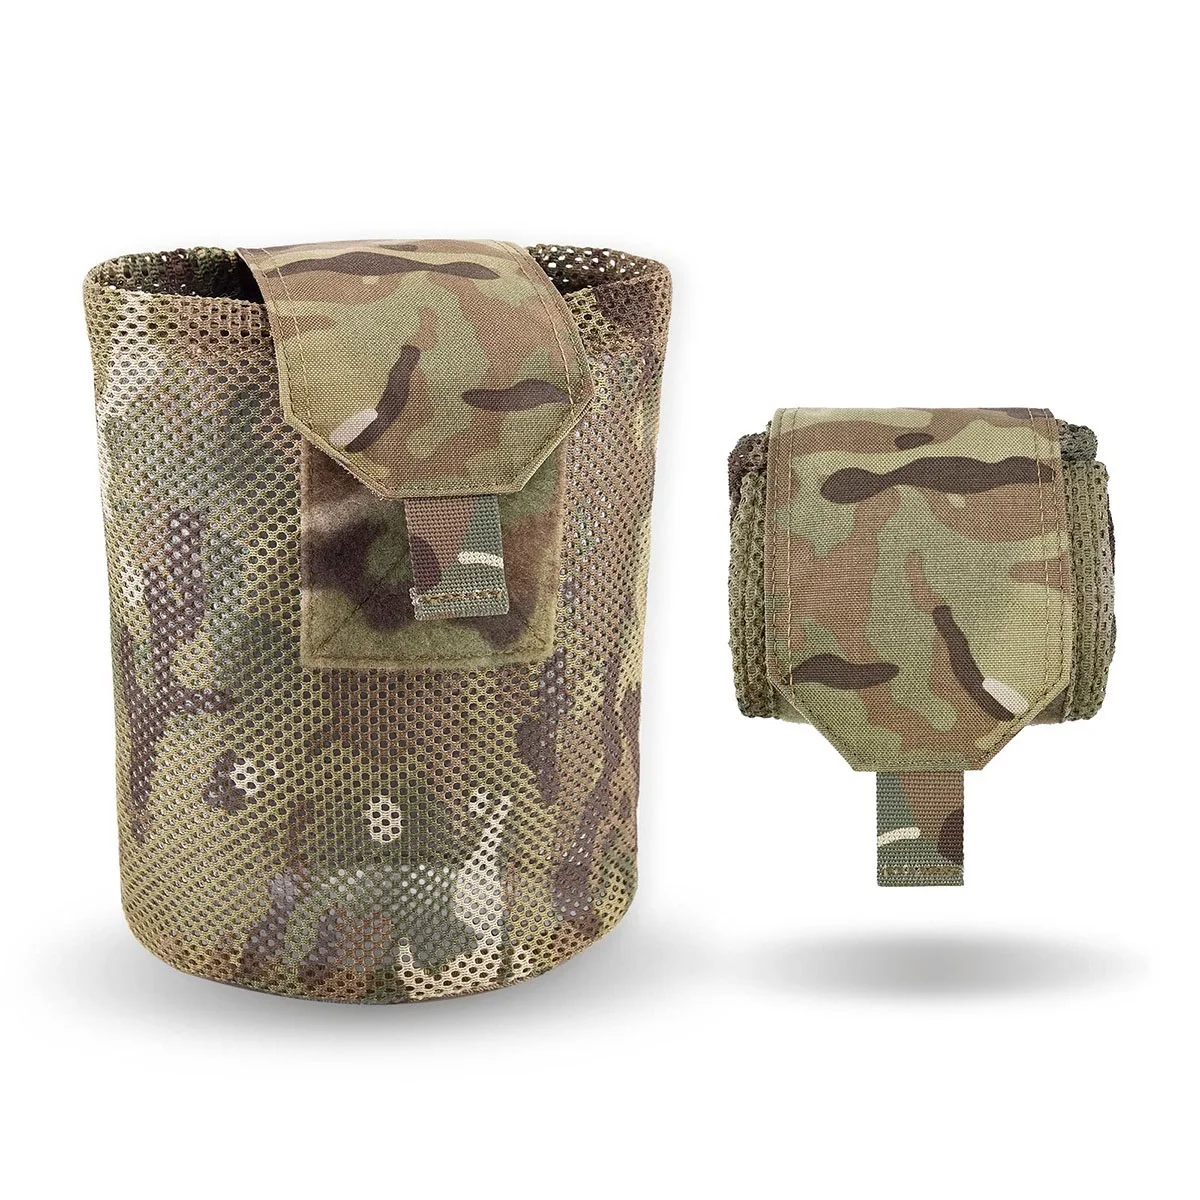 

Foldable Mag Dump Pouch, MOLLE Drawstring Tactical Recovery Tool Pouch, Magazine Utility Roll Up Wiast Bag For Duty Belt